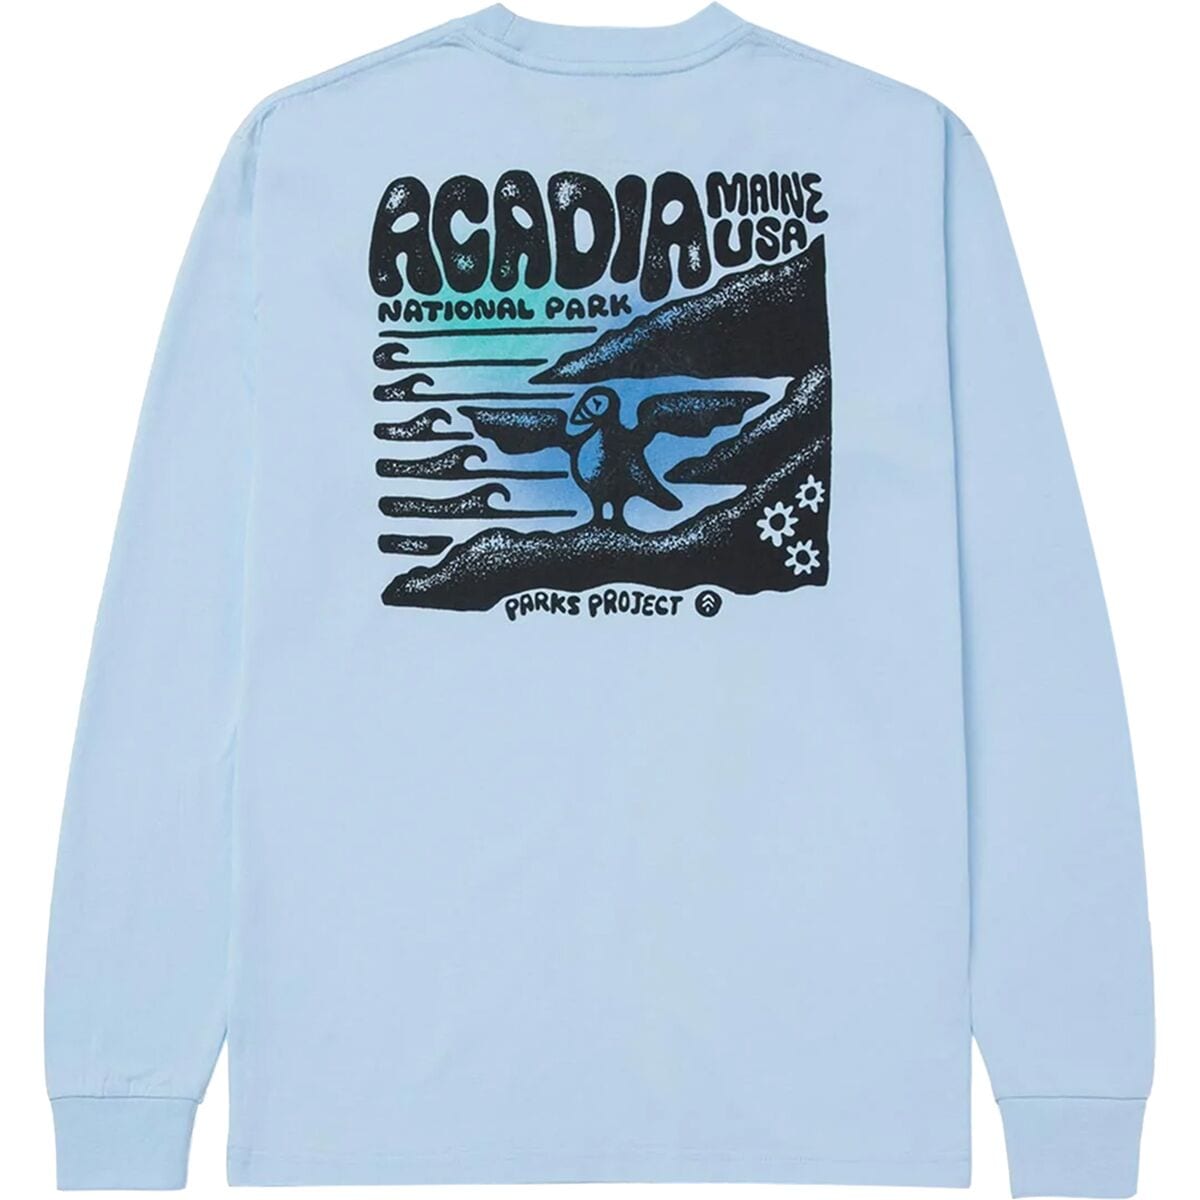 Parks Project Acadia Puffins Long-Sleeve T-Shirt - Men's